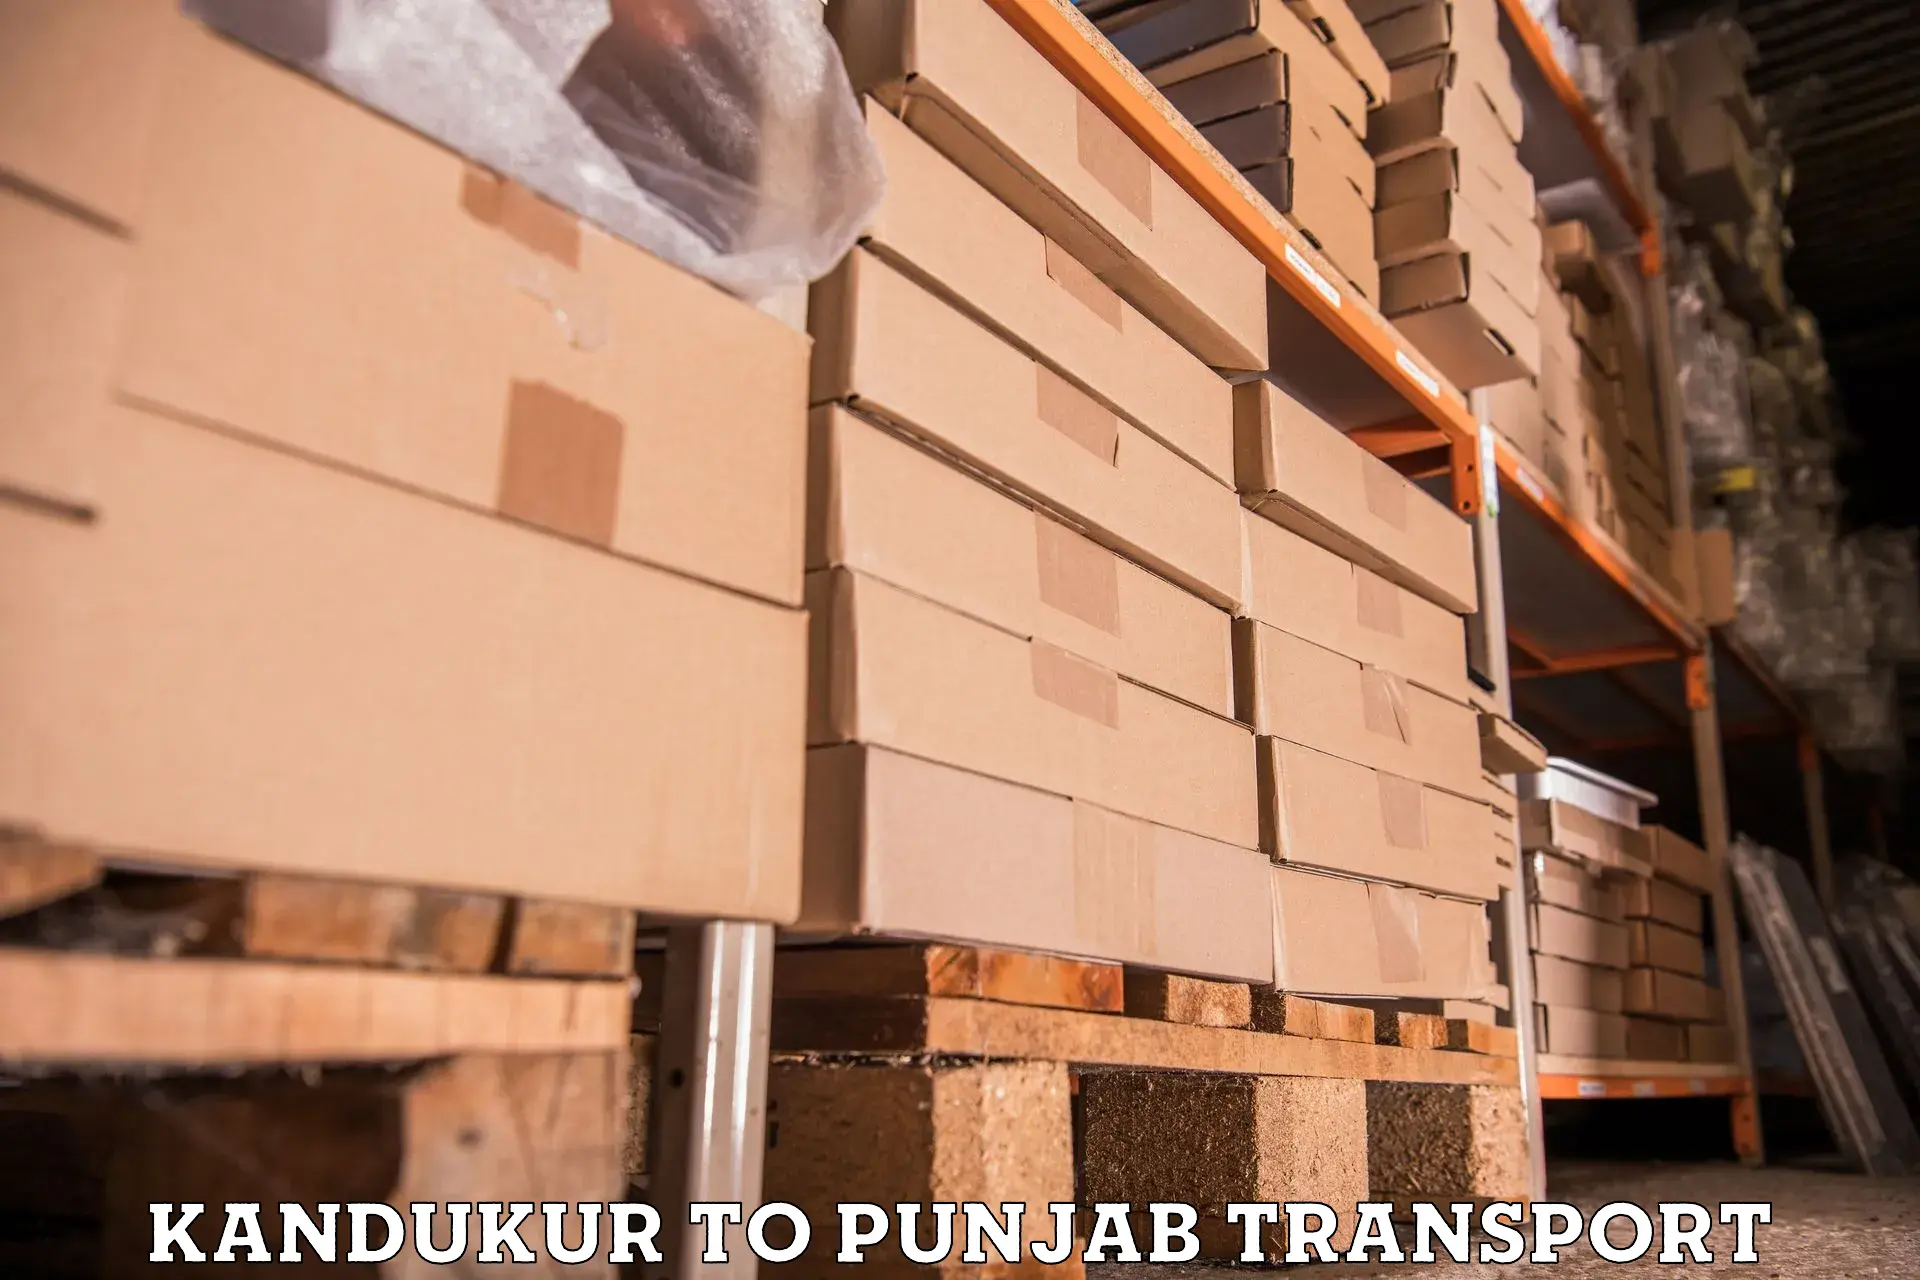 Truck transport companies in India in Kandukur to Pathankot